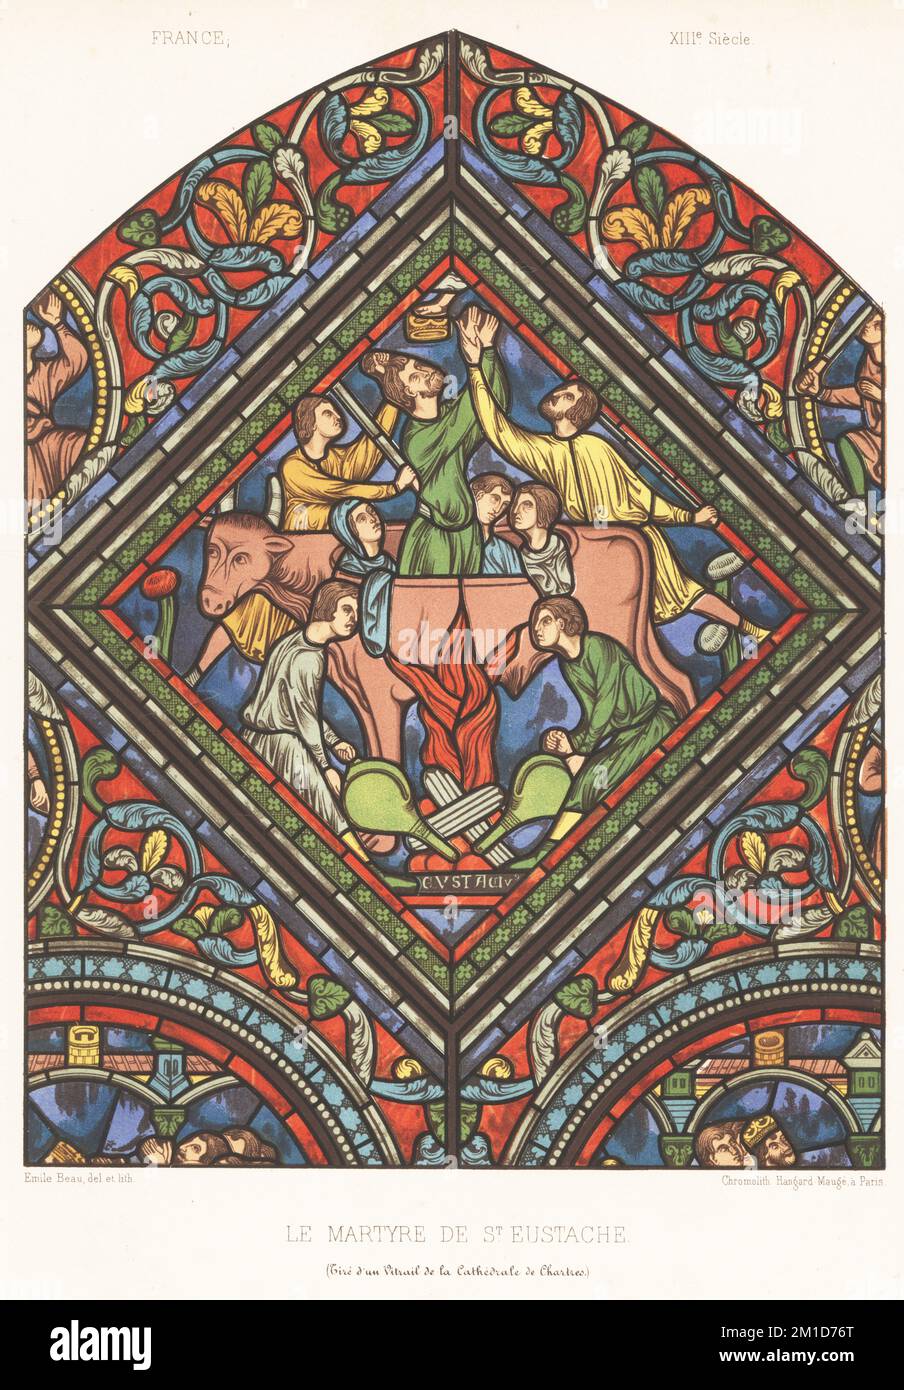 The martyrdom of Saint Eustace, Roman general burned with his family in a brazen bull by Roman Emperor Hadrian in AD 118. Similar to F 219, Lan. MS 7019, Bibliotheque Imperiale. Le martyre de St. Eustache. From a stained glass window in Chartres Cathedral. Chromolithograph by Emile Beau from Charles Louandre’s Les Arts Somptuaires, The Sumptuary Arts, Hangard-Mauge, Paris, 1858. Stock Photo